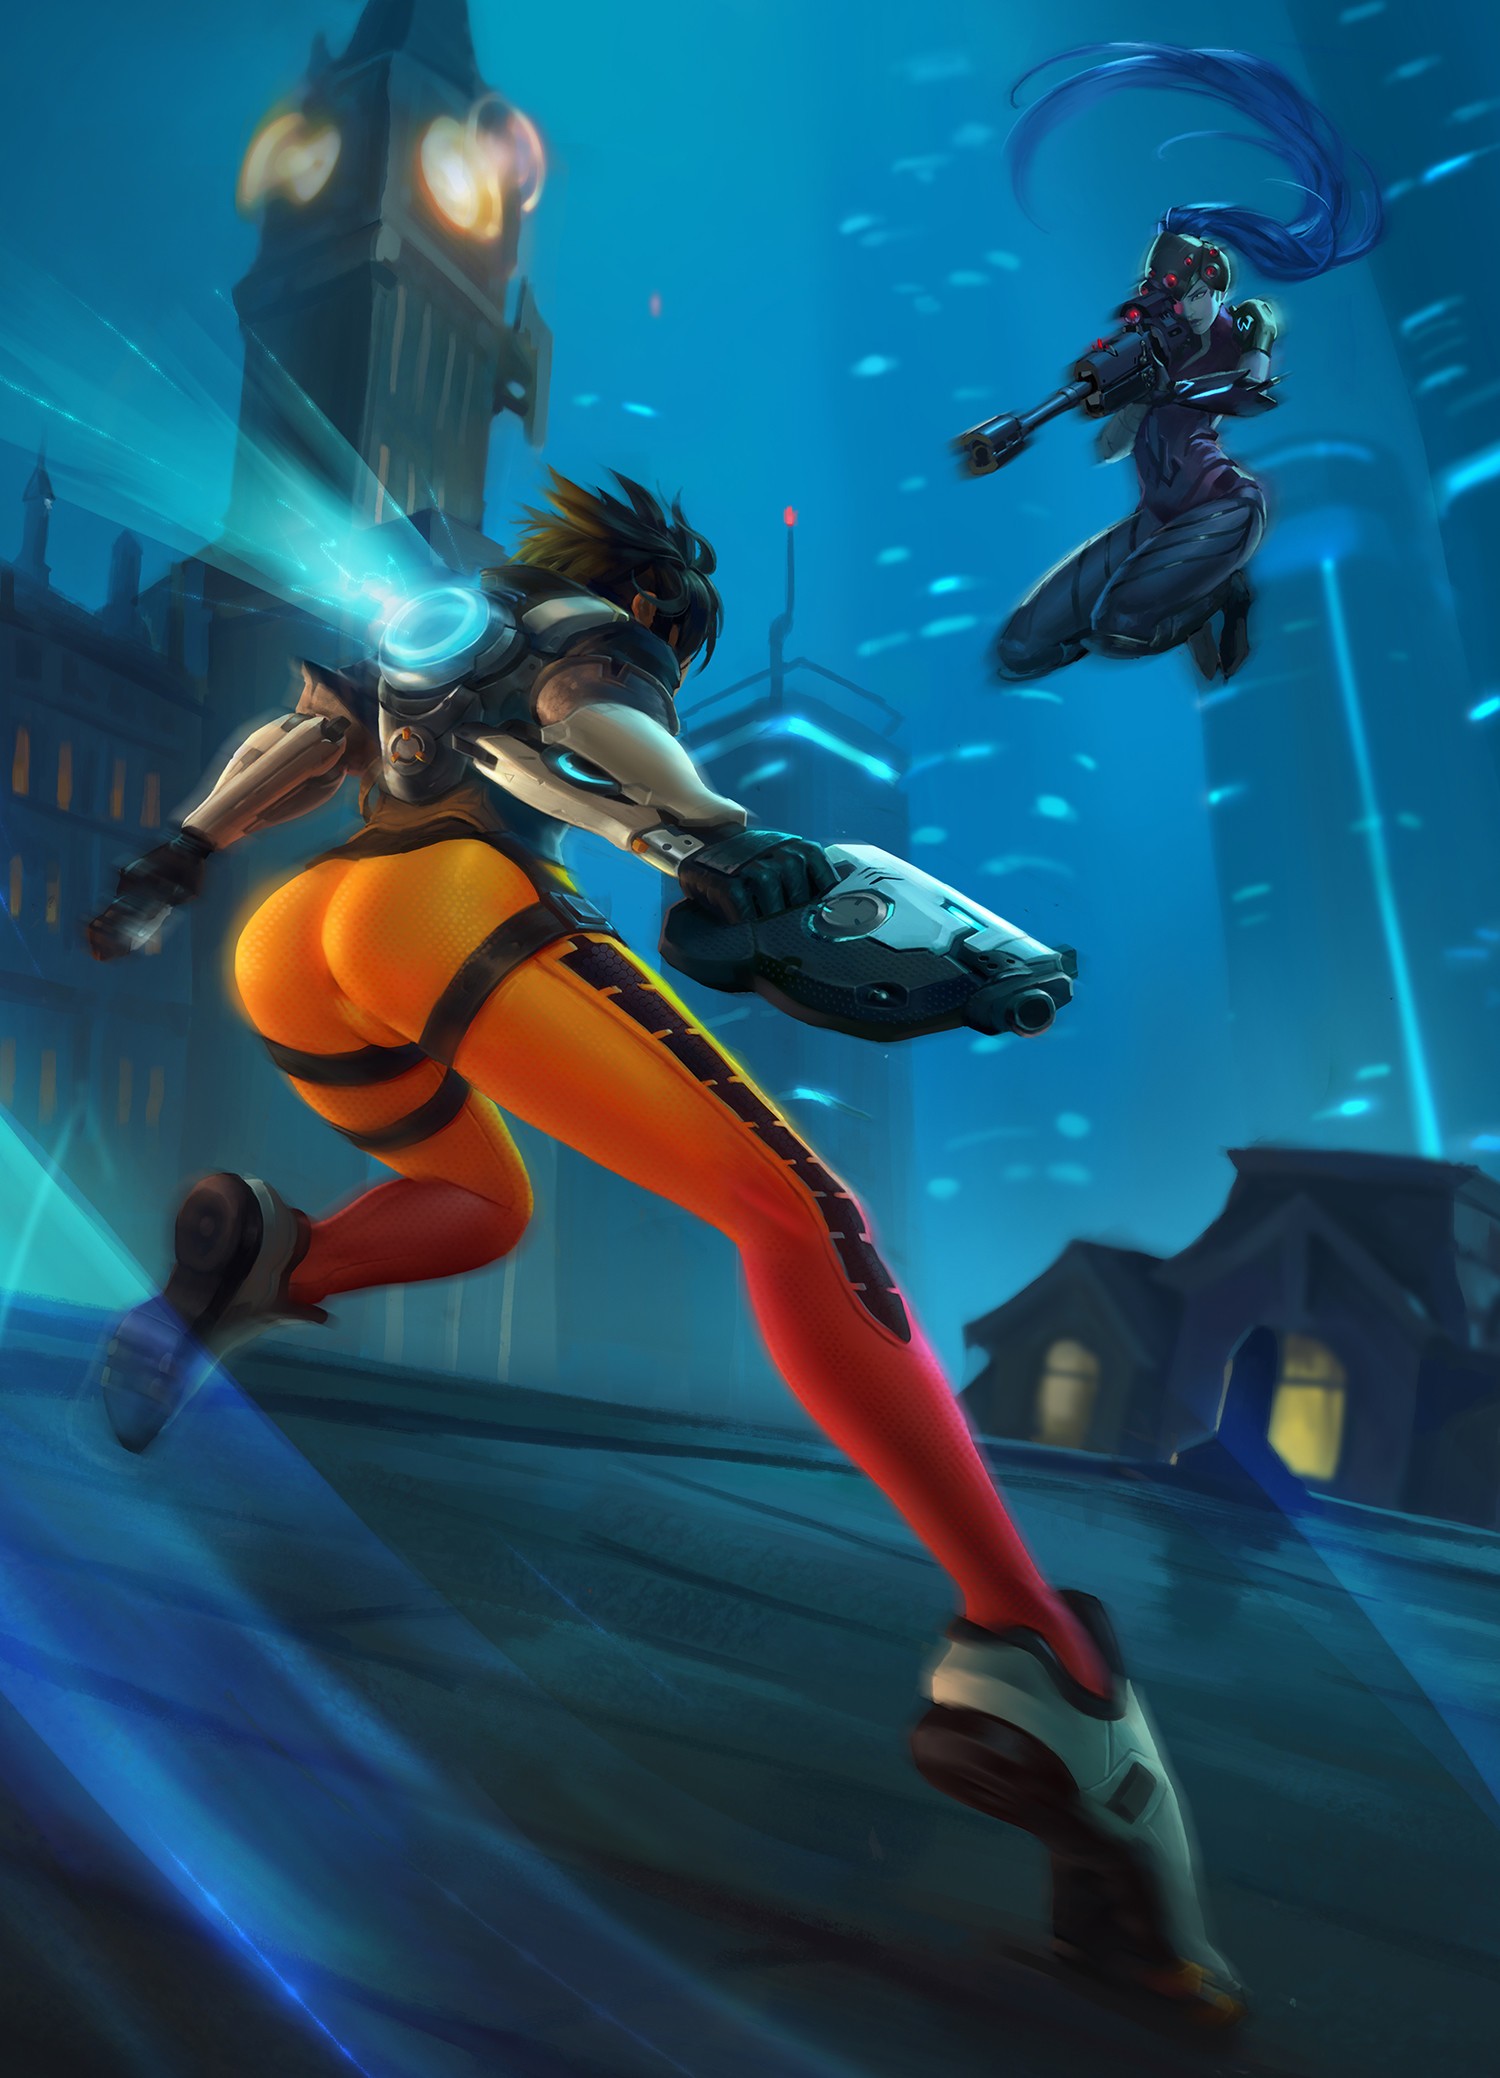 General 1500x2078 Overwatch Tracer (Overwatch) Widowmaker (Overwatch) PC gaming rear view video game girls ass tight clothing night two women pistol sniper rifle leggings ponytail long hair bent legs